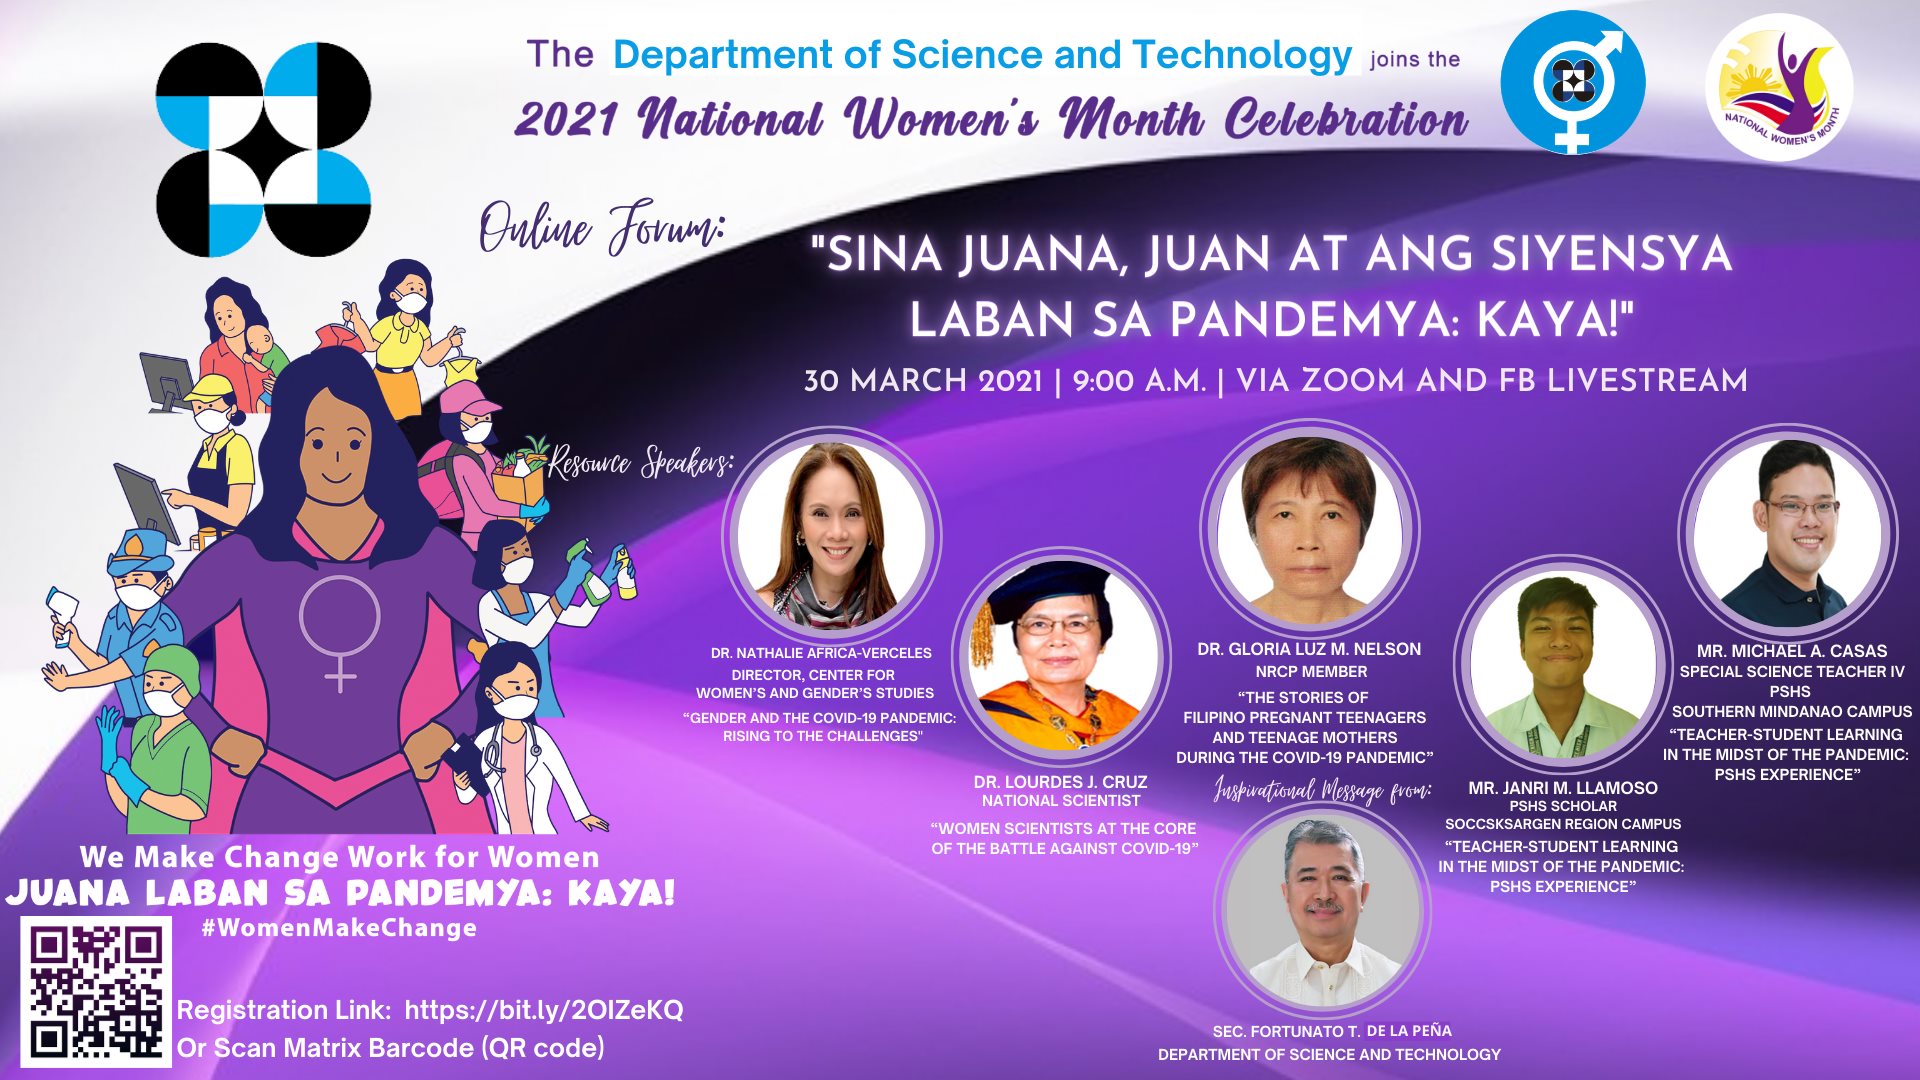 Science department celebrates Pinay Scientists’ contributions in the time of pandemic image